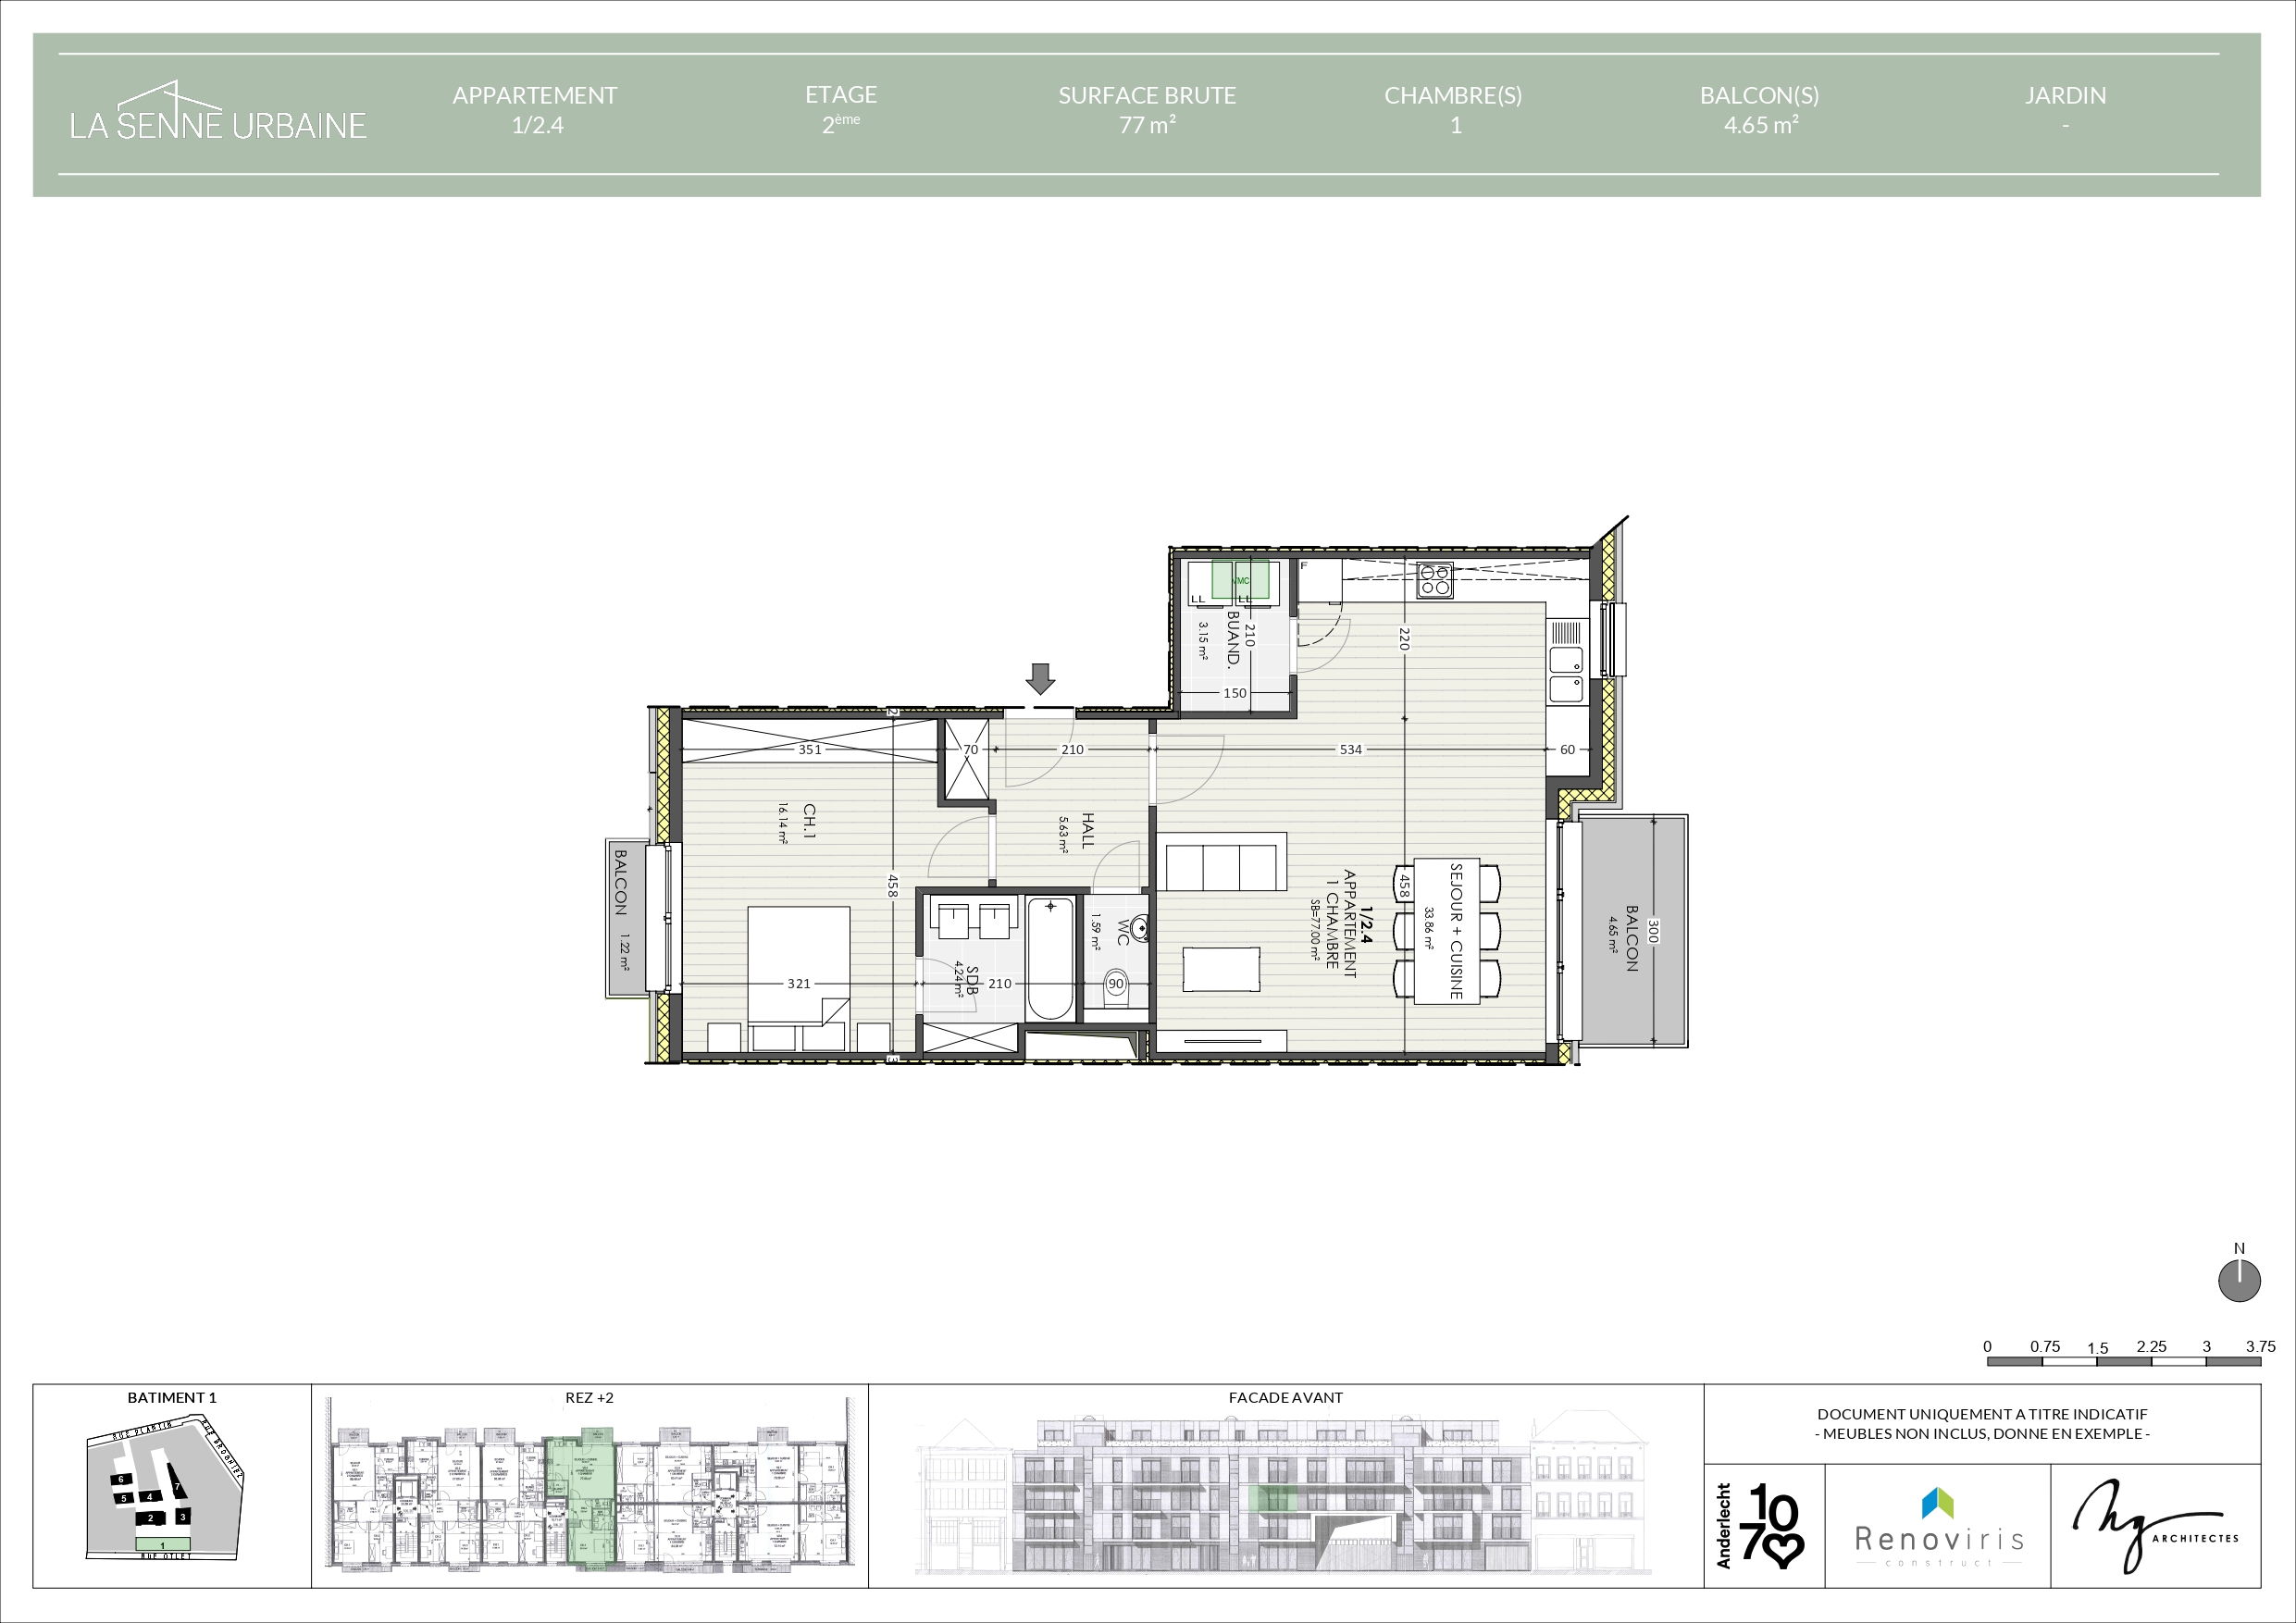 R+2 - Appartement 1_2.4_24_page-0001